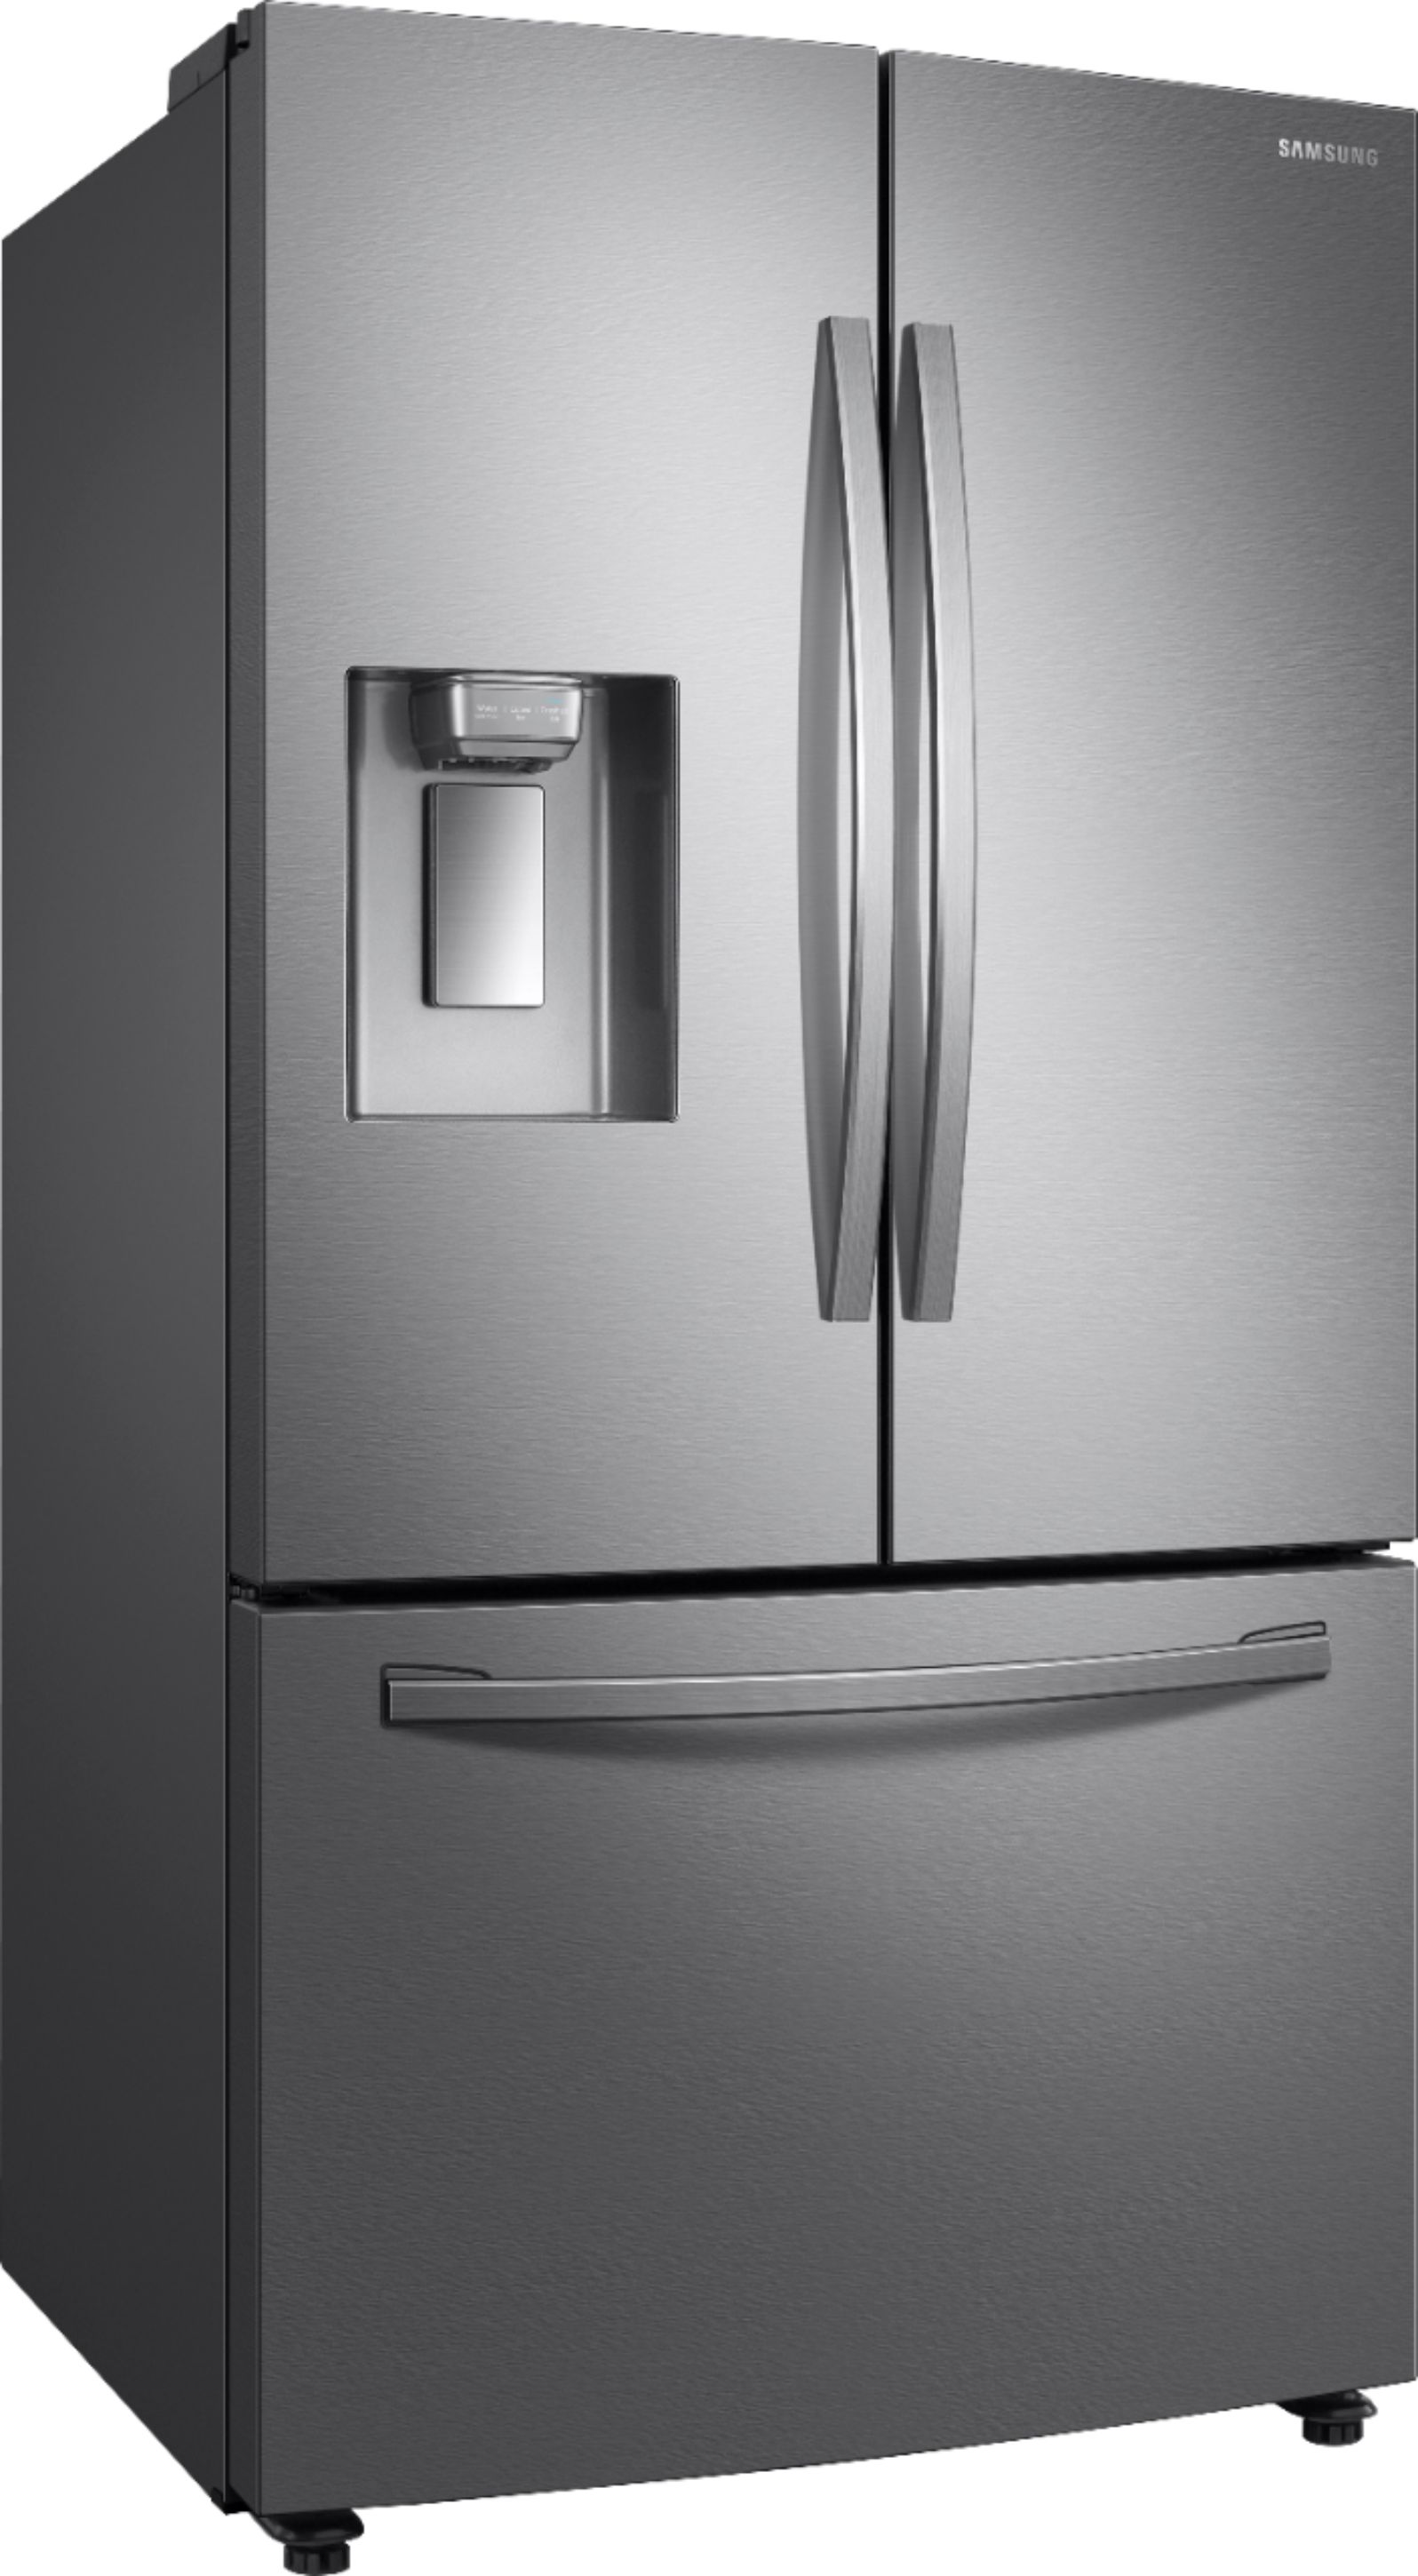 Angle View: Samsung - 22.6 Cu. Ft. French Door Counter-Depth Fingerprint Resistant Refrigerator with CoolSelect Pantry - Stainless steel